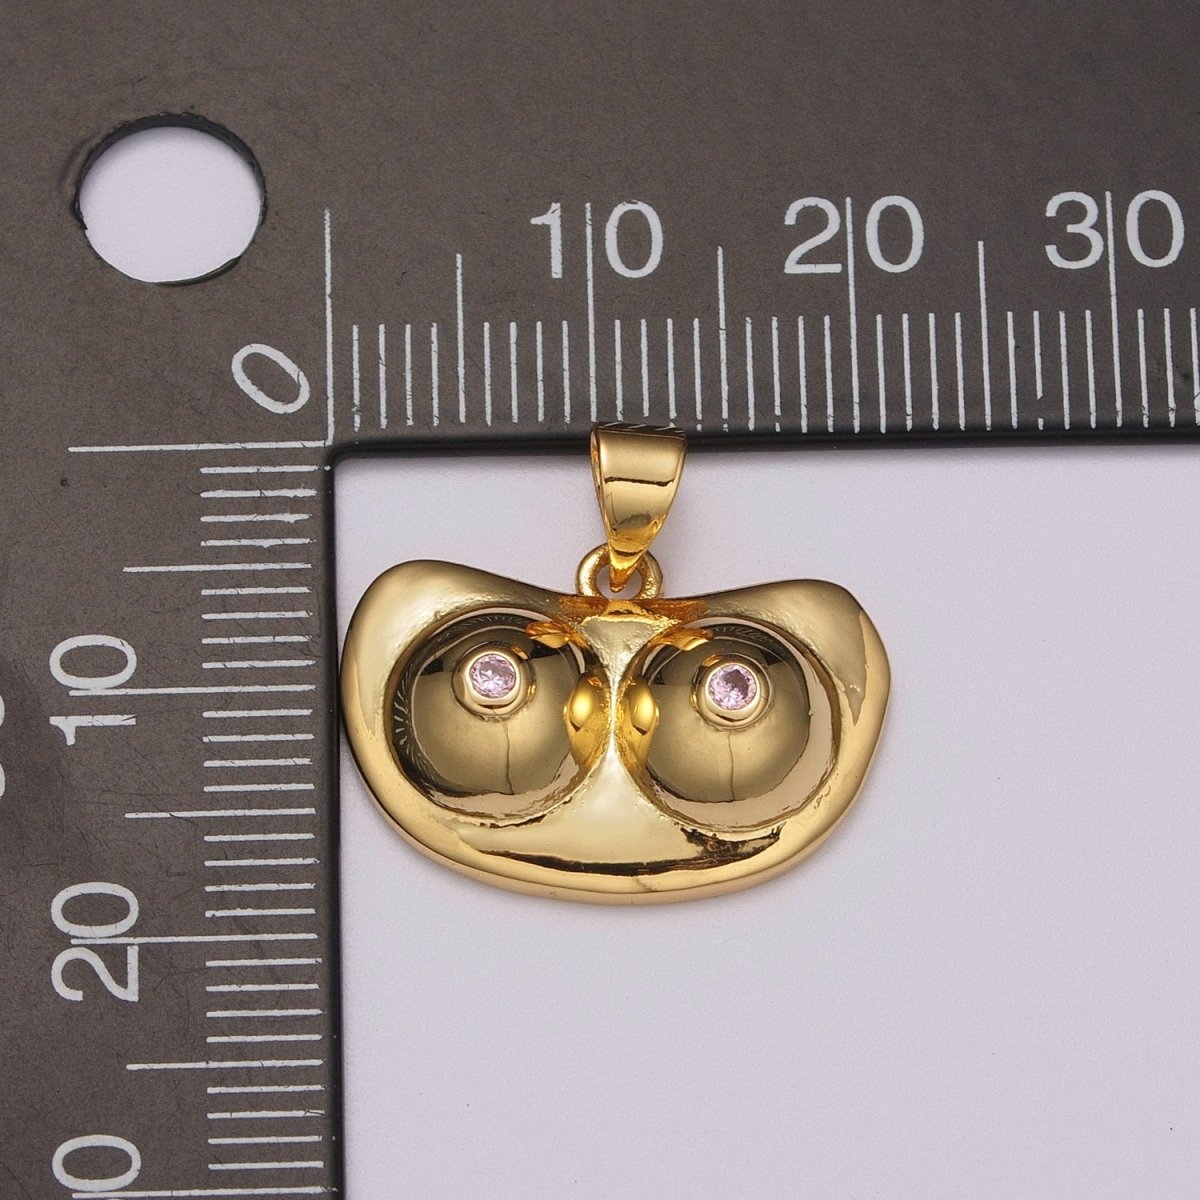 Gold Boob Charm | Silver Breast Pendants | Feminist Jewelry Making Supply | Gold Breast Necklace Pendant N-1414 N-1415 - DLUXCA